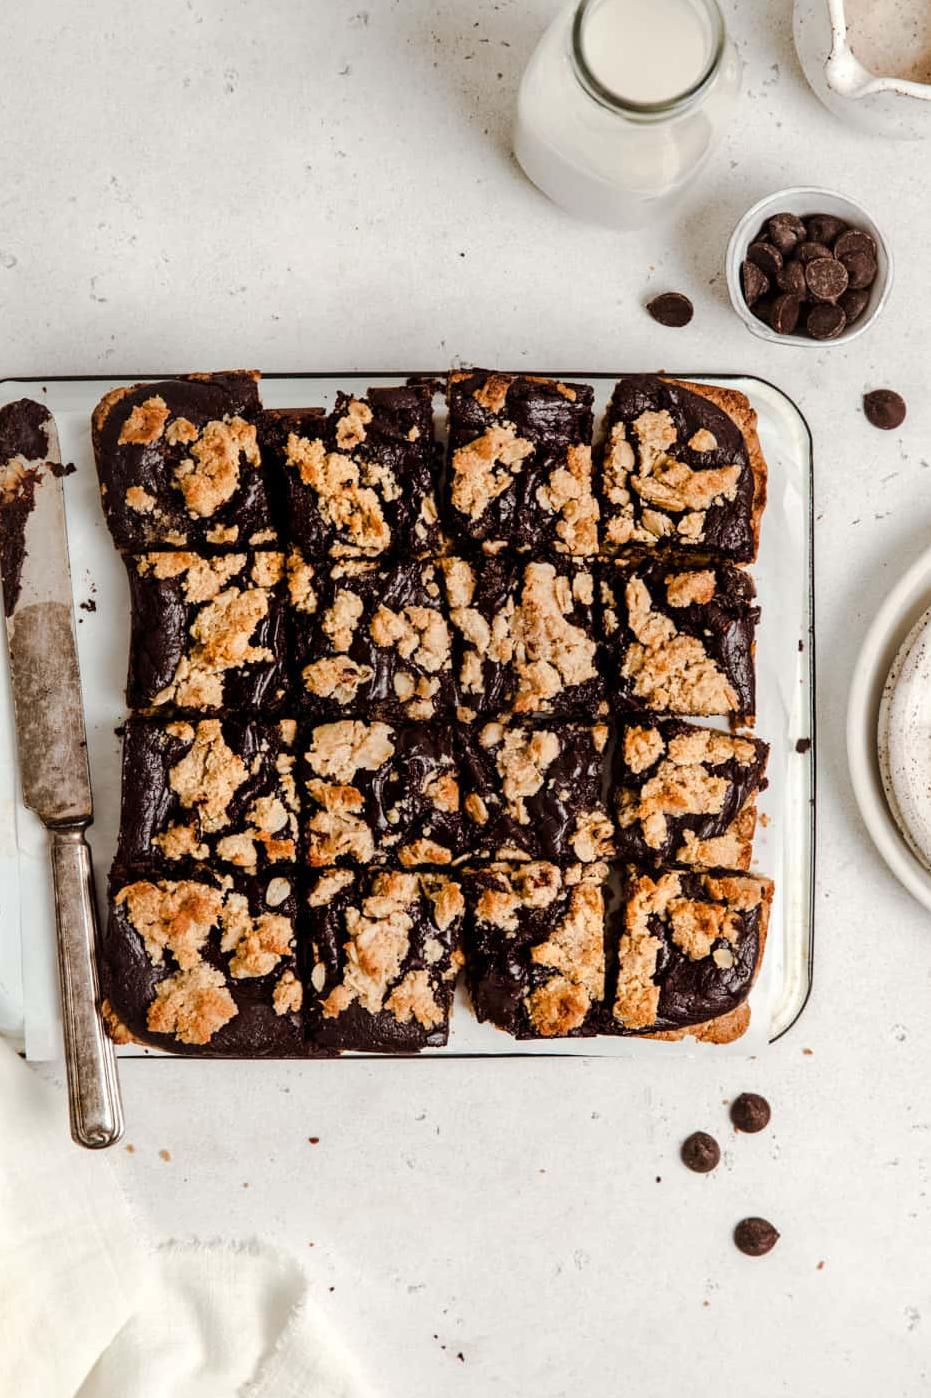  Who needs the coffee shop when you can make these amazing bars right in your own kitchen?